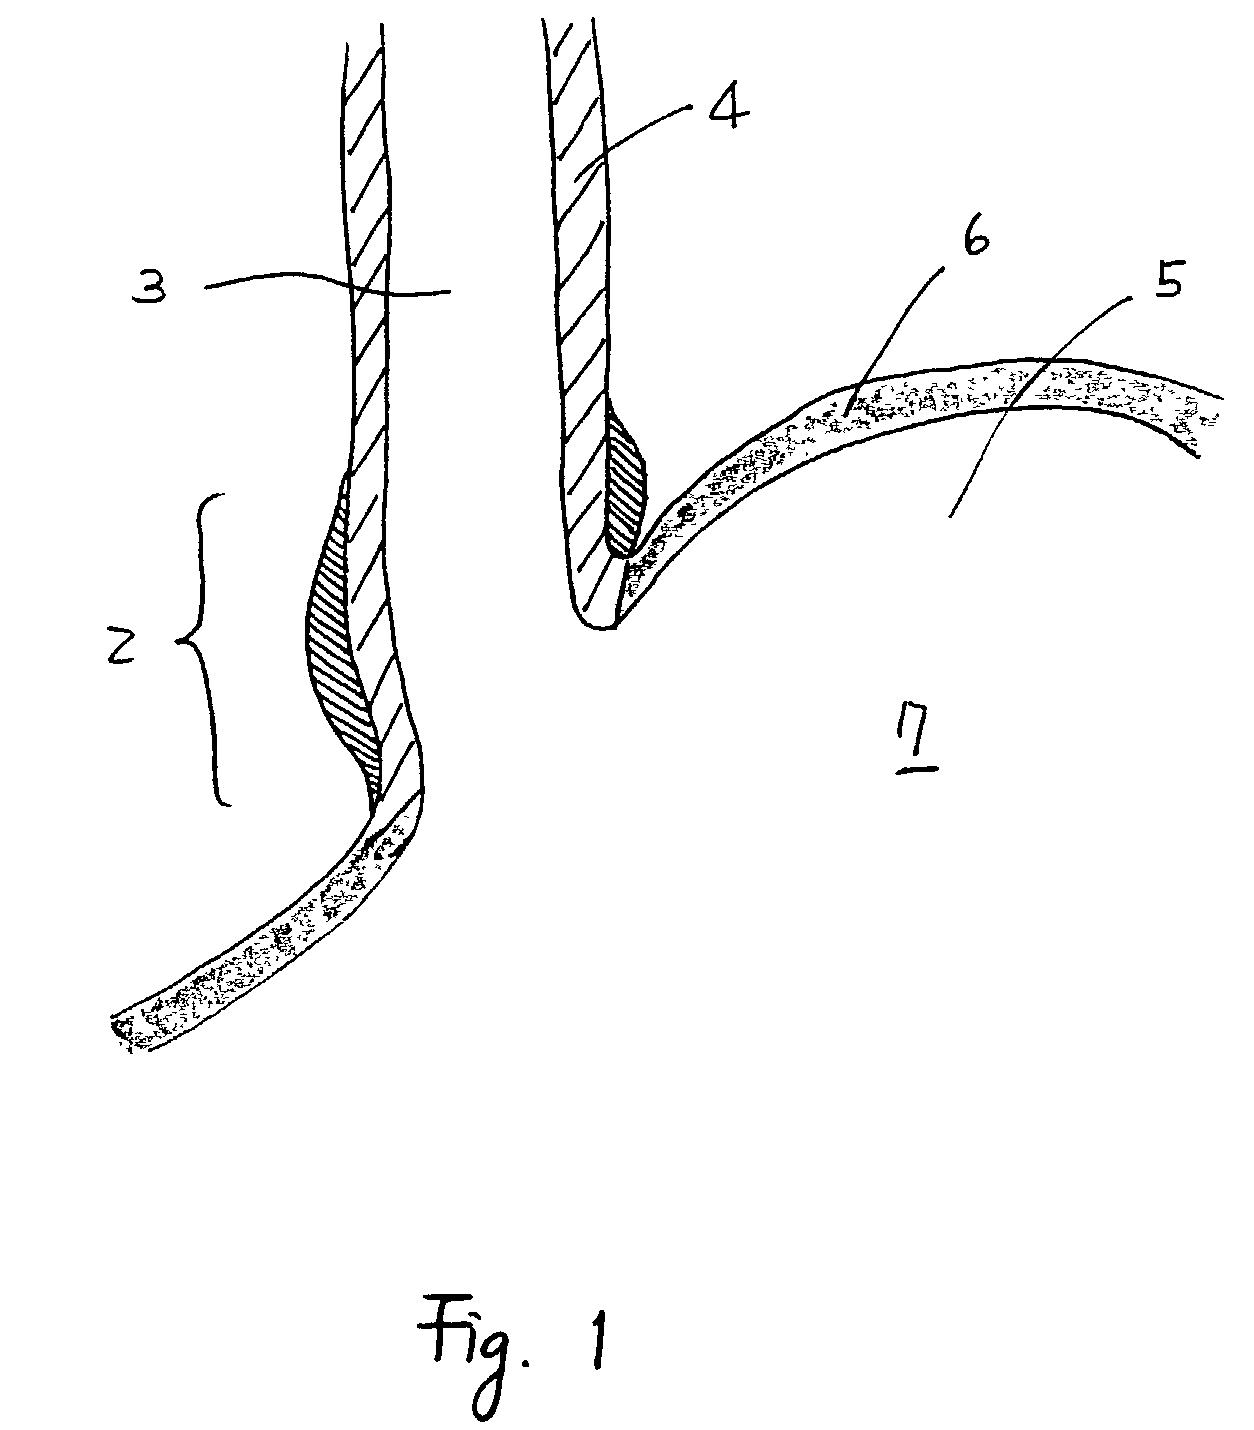 Devices and methods for fastening tissue layers